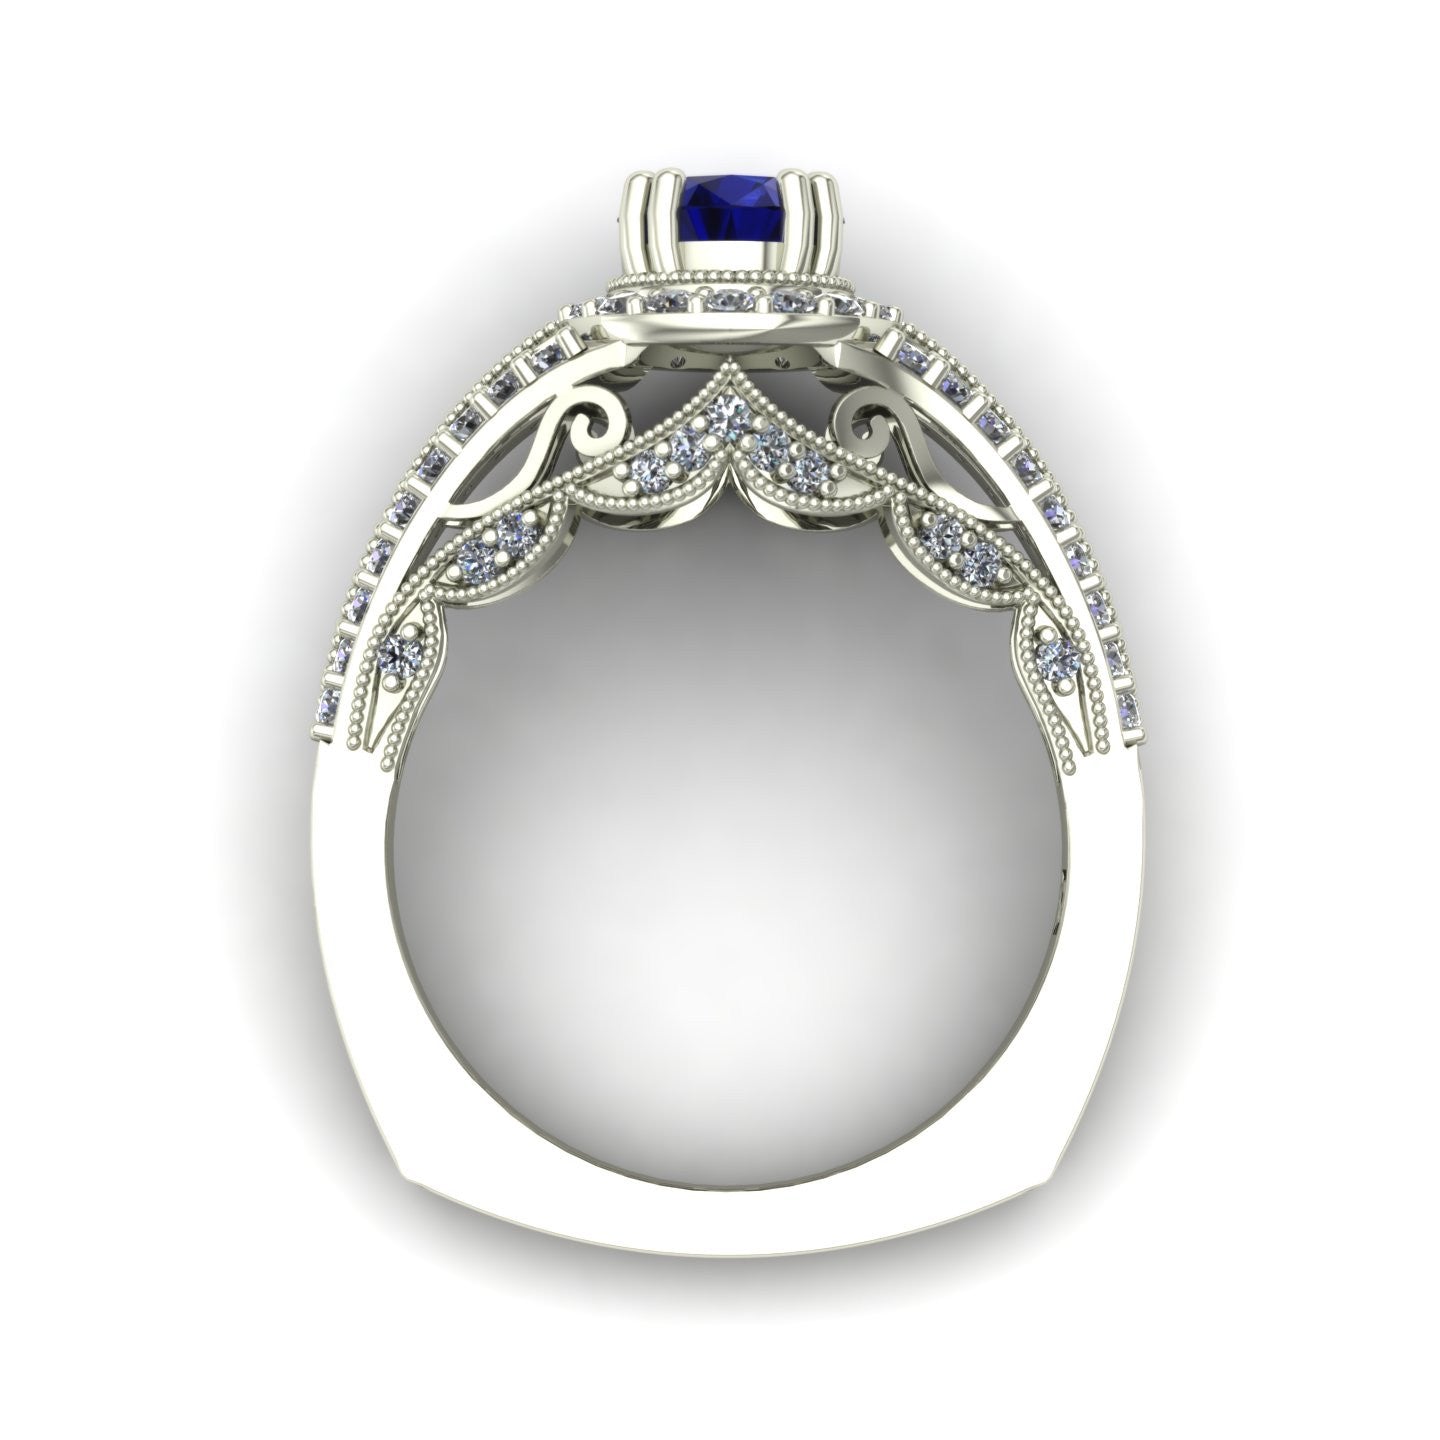 Blue sapphire and diamond scallop ring in 14k white gold - Charles Babb Designs - through finger